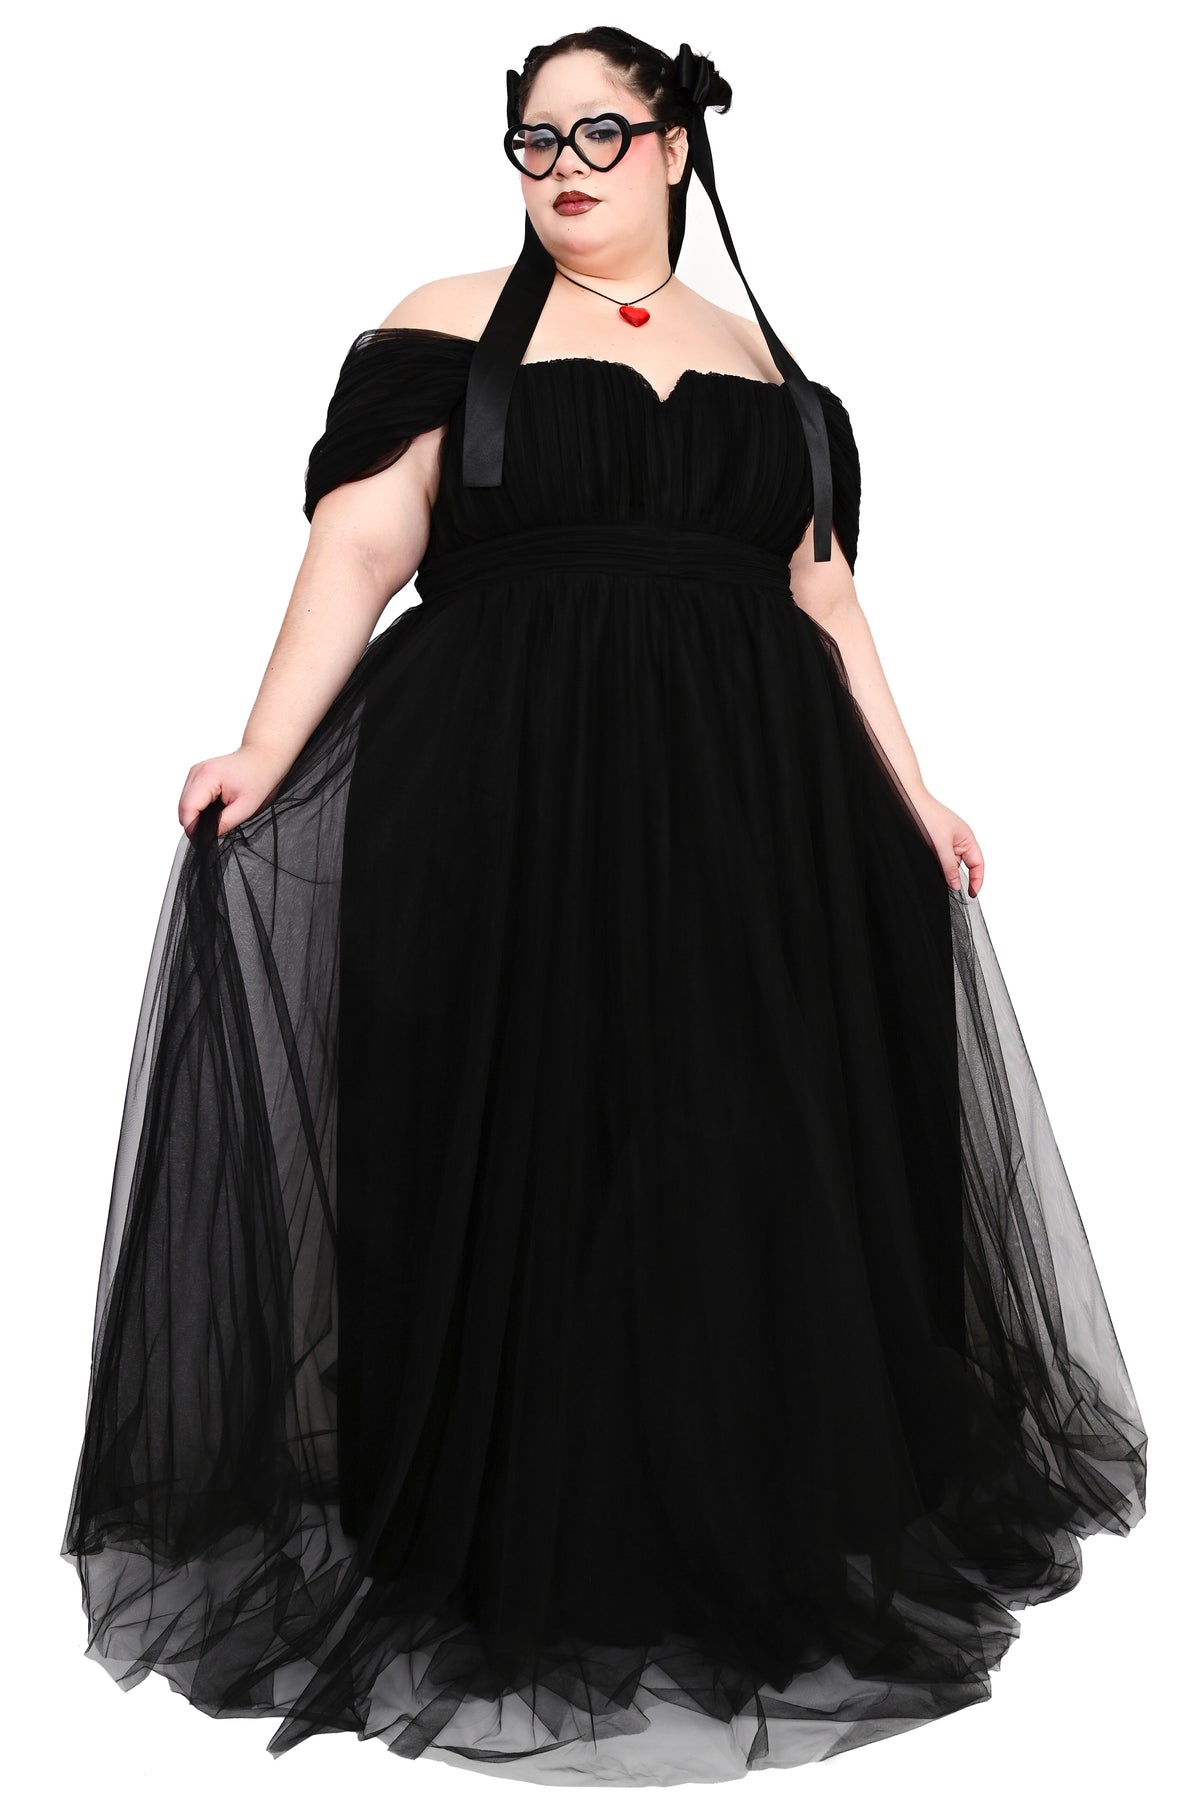 Black Swan Gown - Limited Edition